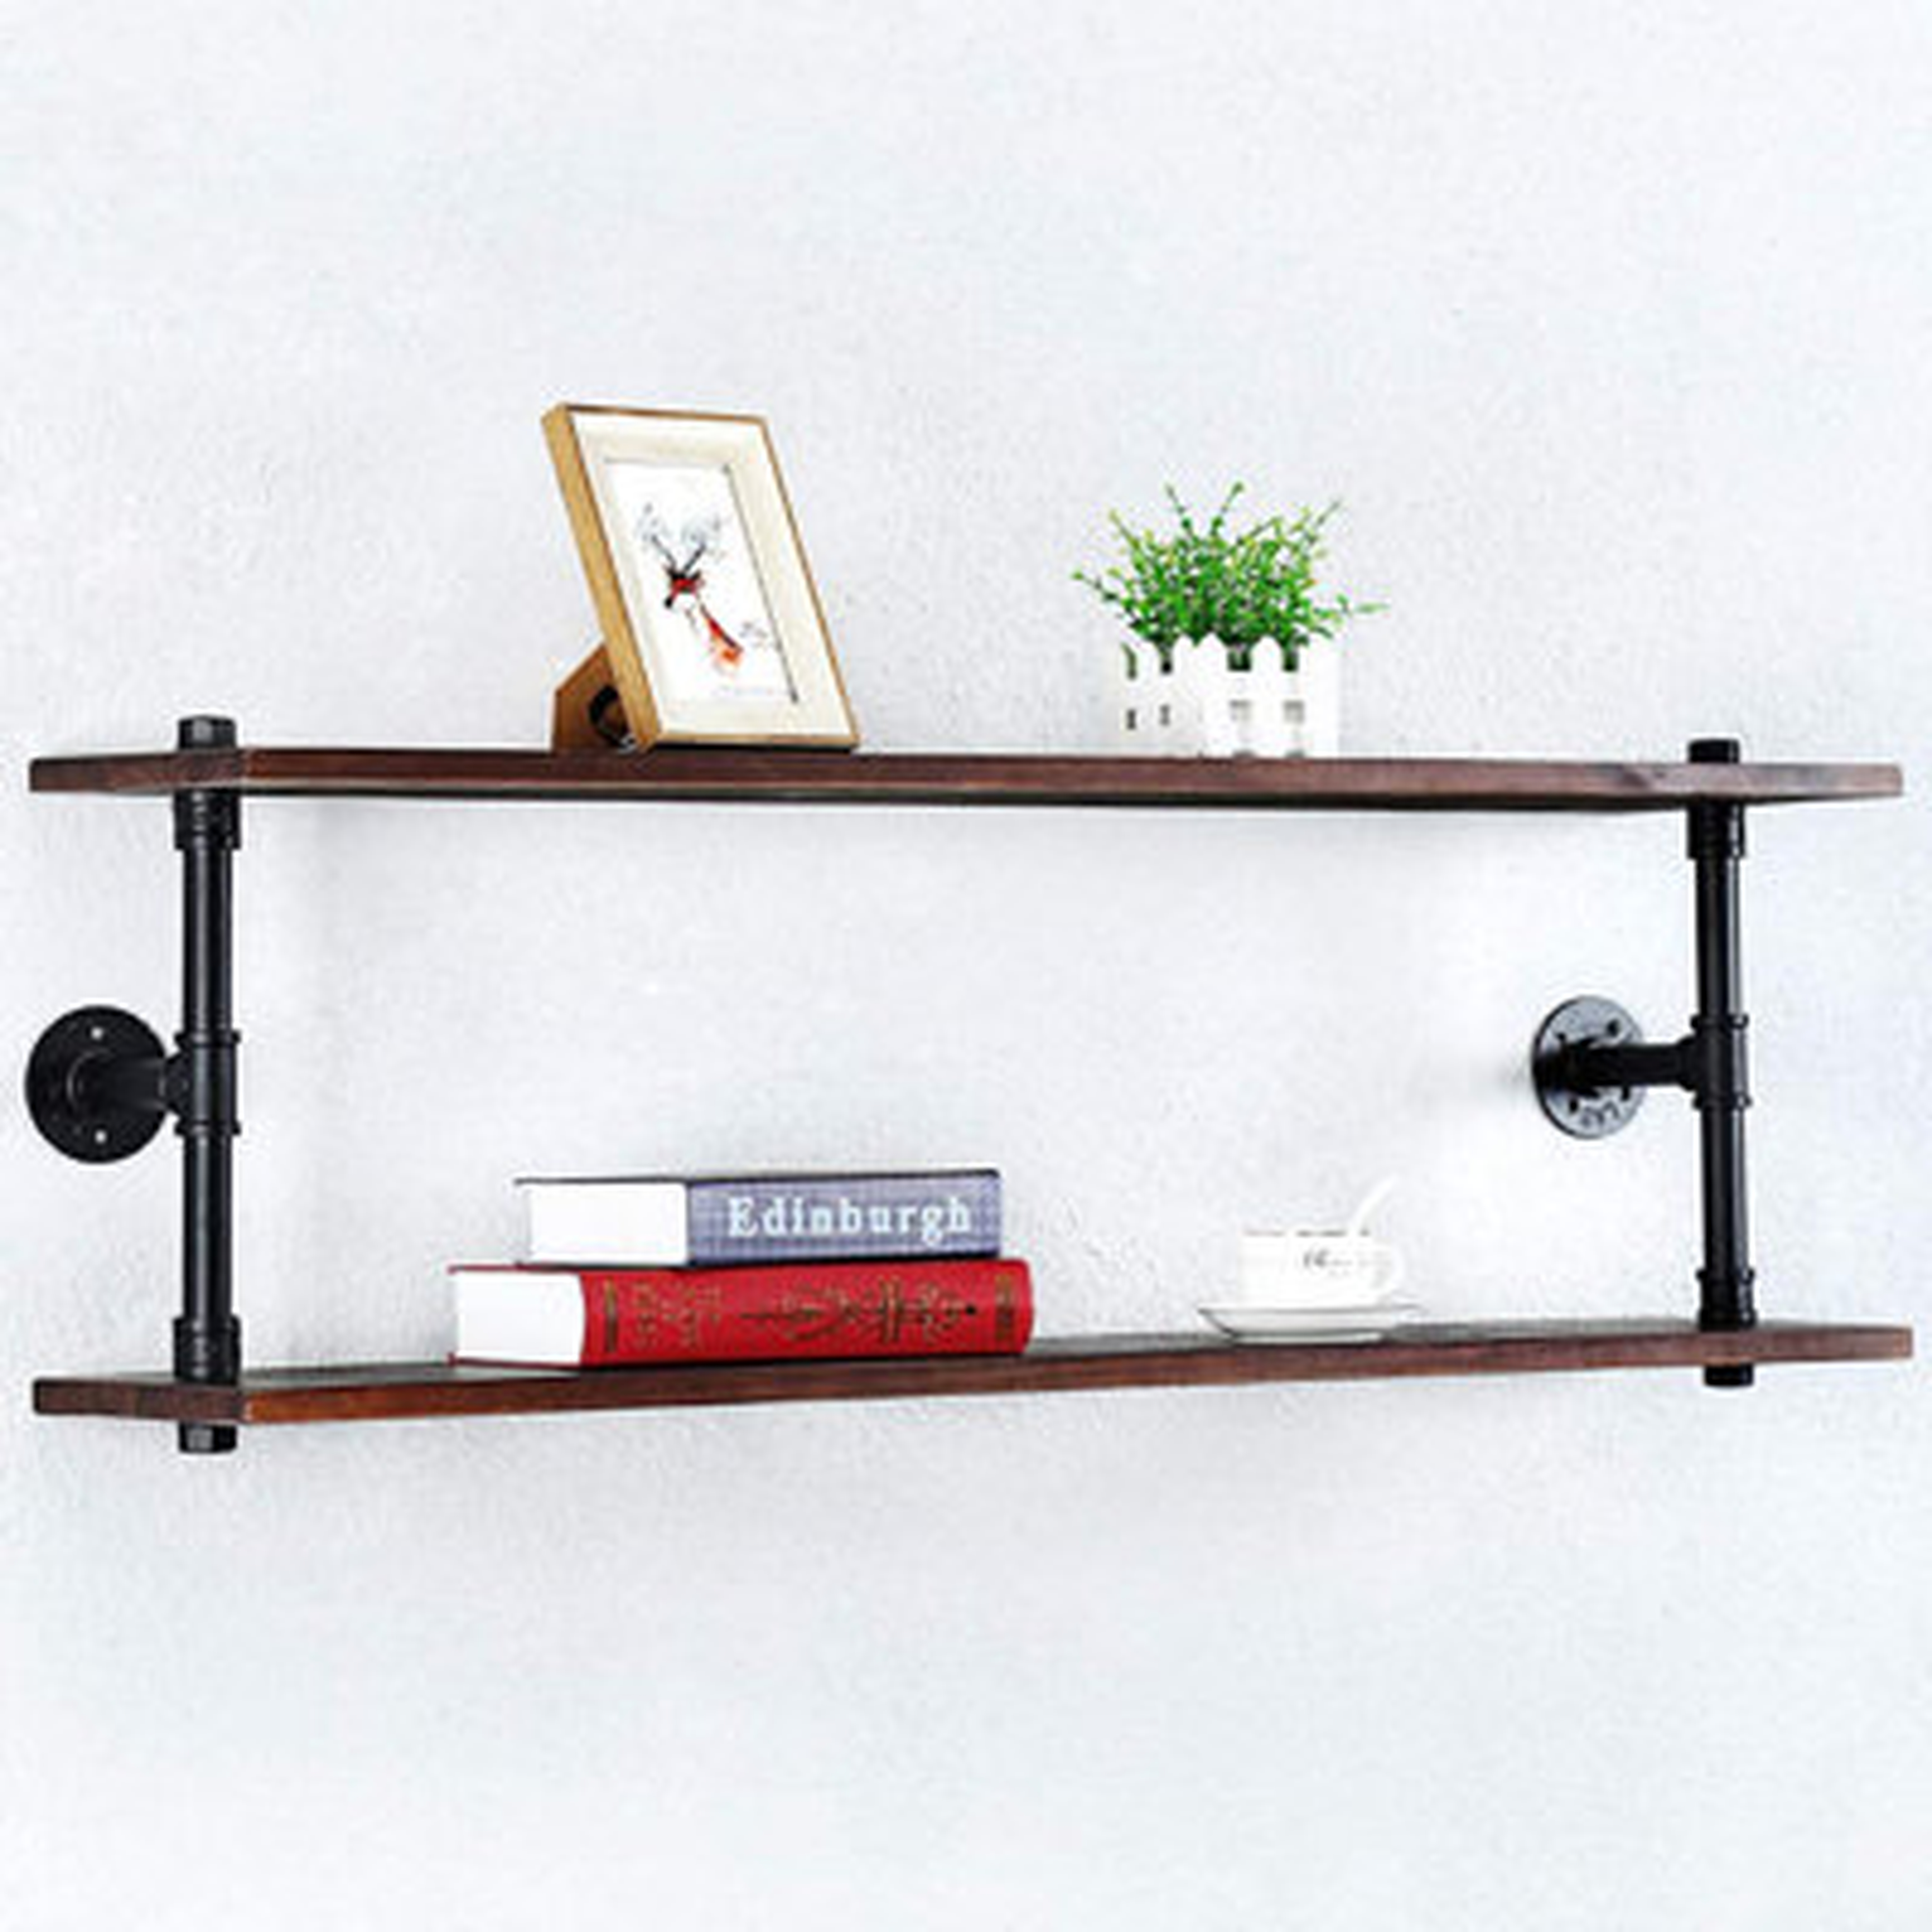 Industrial Pipe Shelf Wall Mounted,Steampunk Real Wood Book Shelves,2 Tier Rustic Metal Floating Shelves,Wall Shelving Unit Bookshelf Hanging Wall Shelves,Farmhouse Kitchen Bar Shelving(42In) - Wayfair